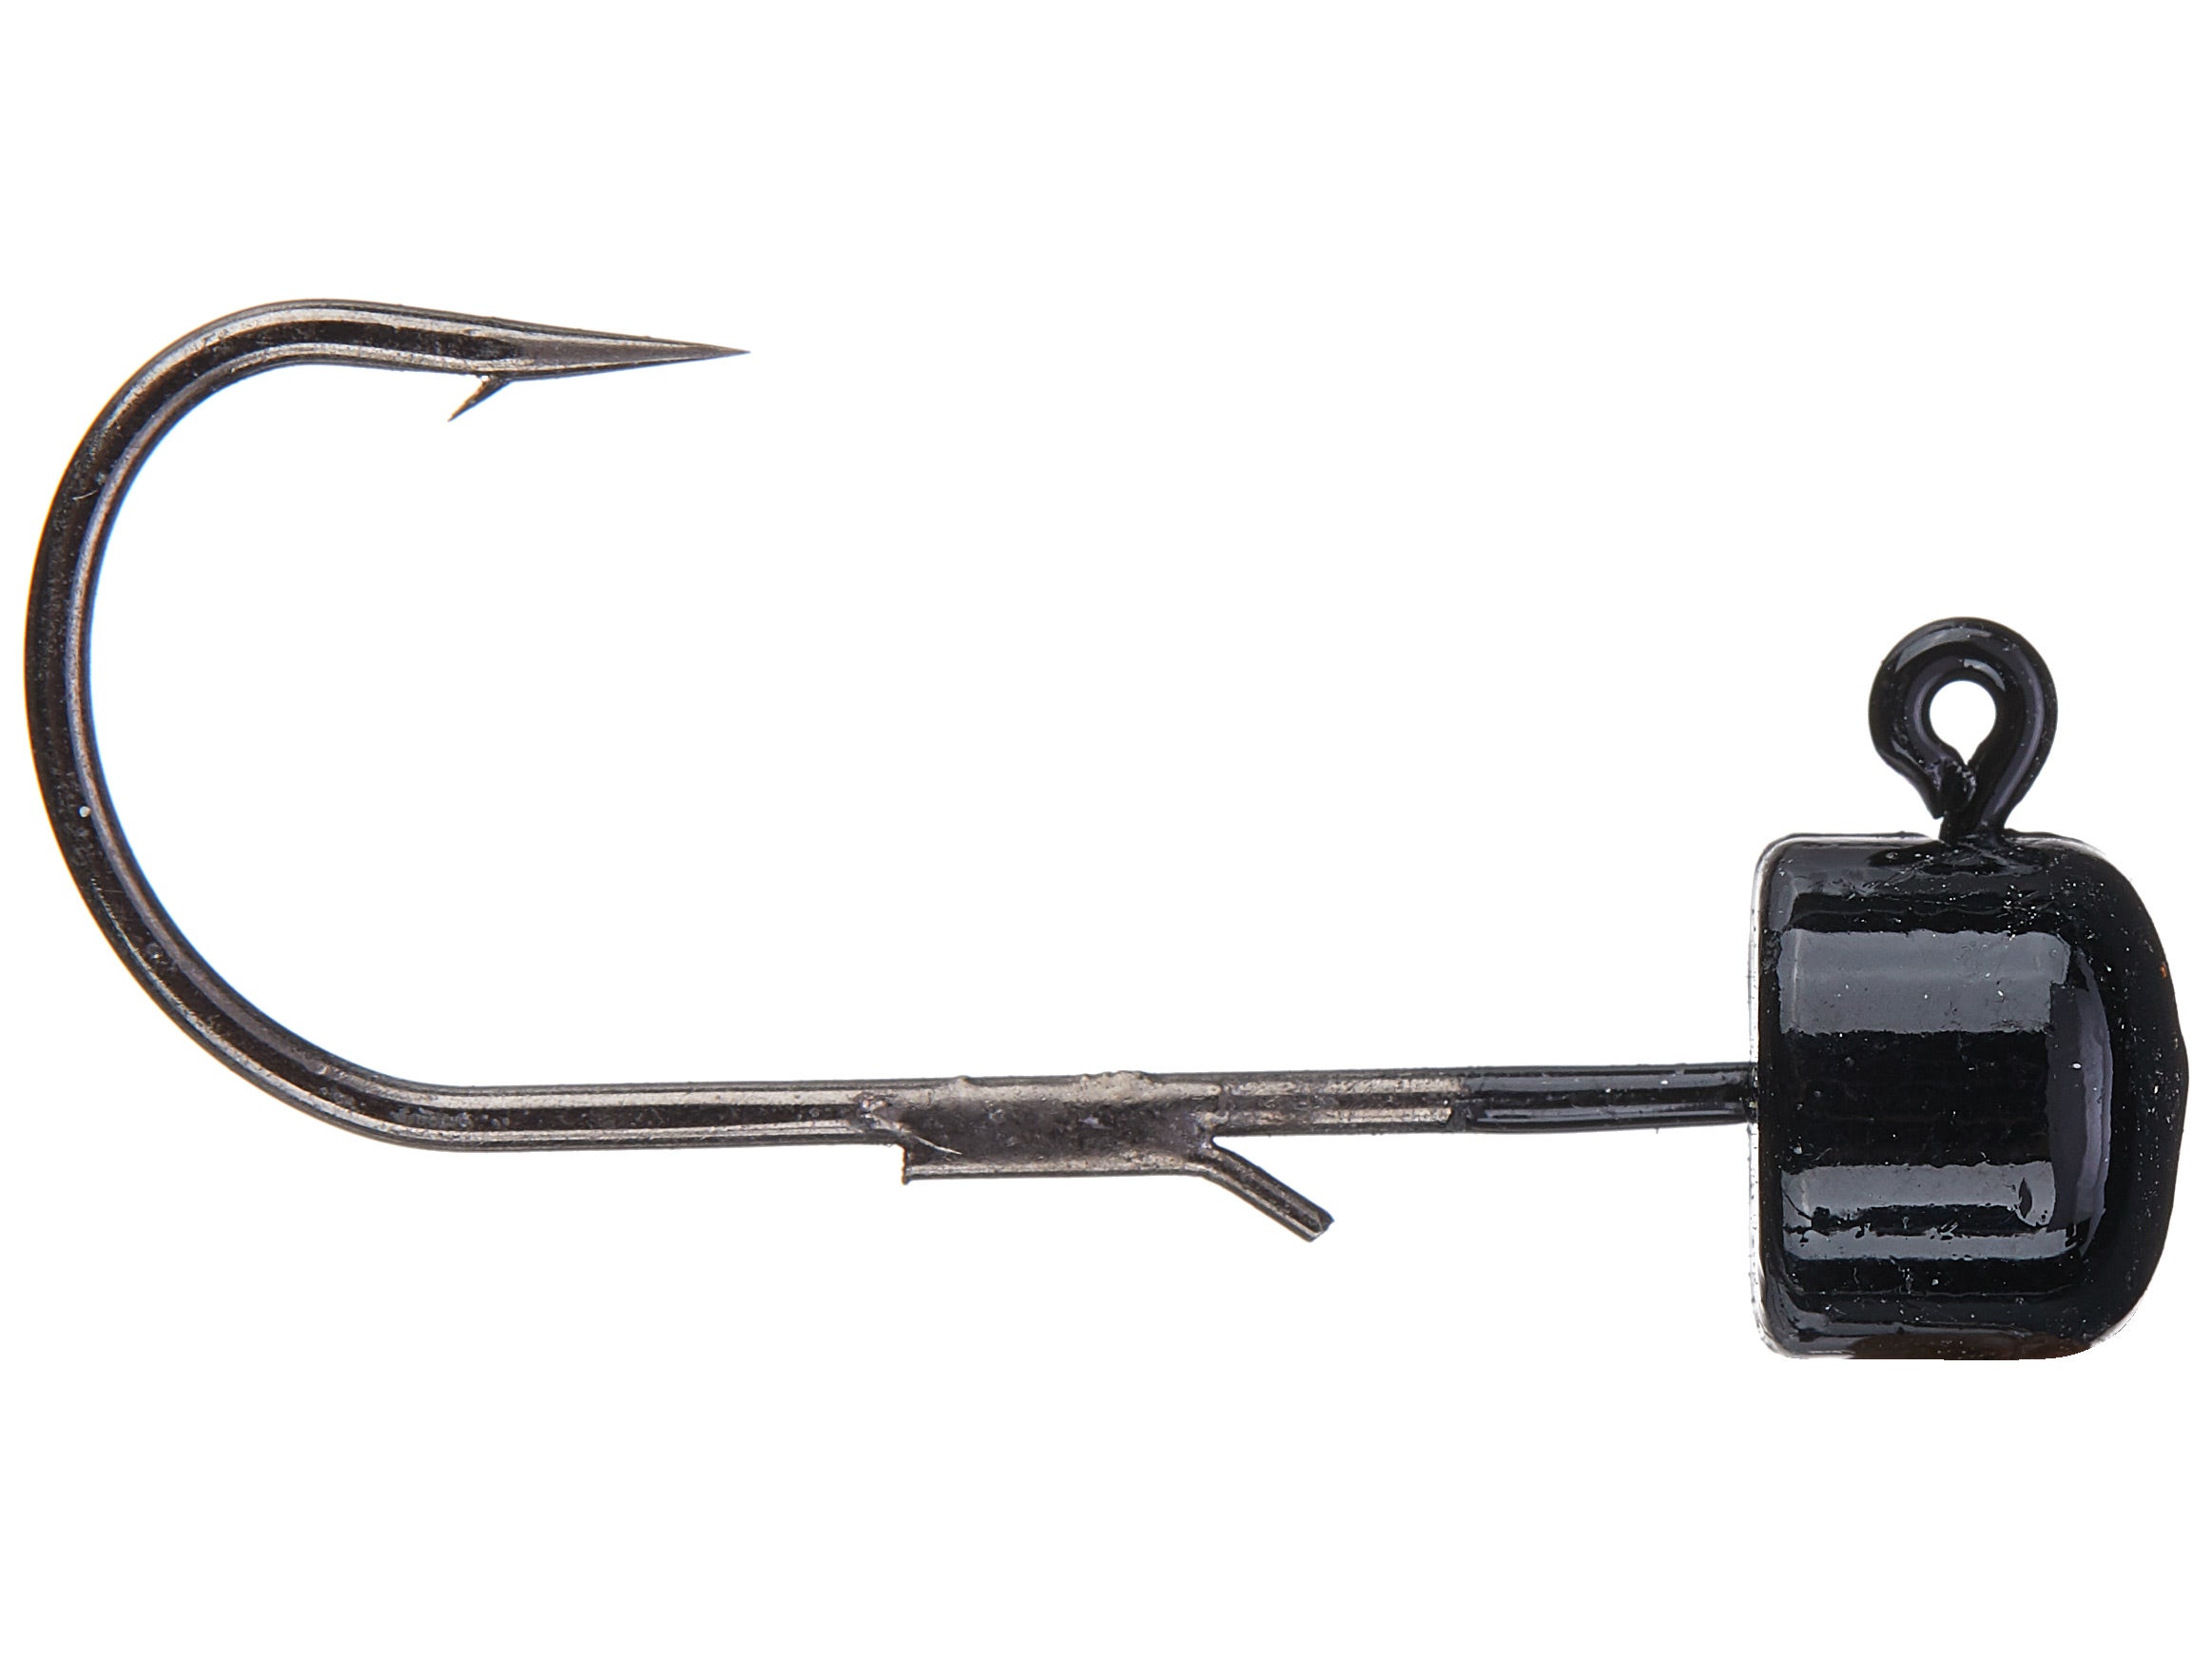 Tungsten Offset Weedless Ned Rig Jigheads Harmony Fishing 5 Pack